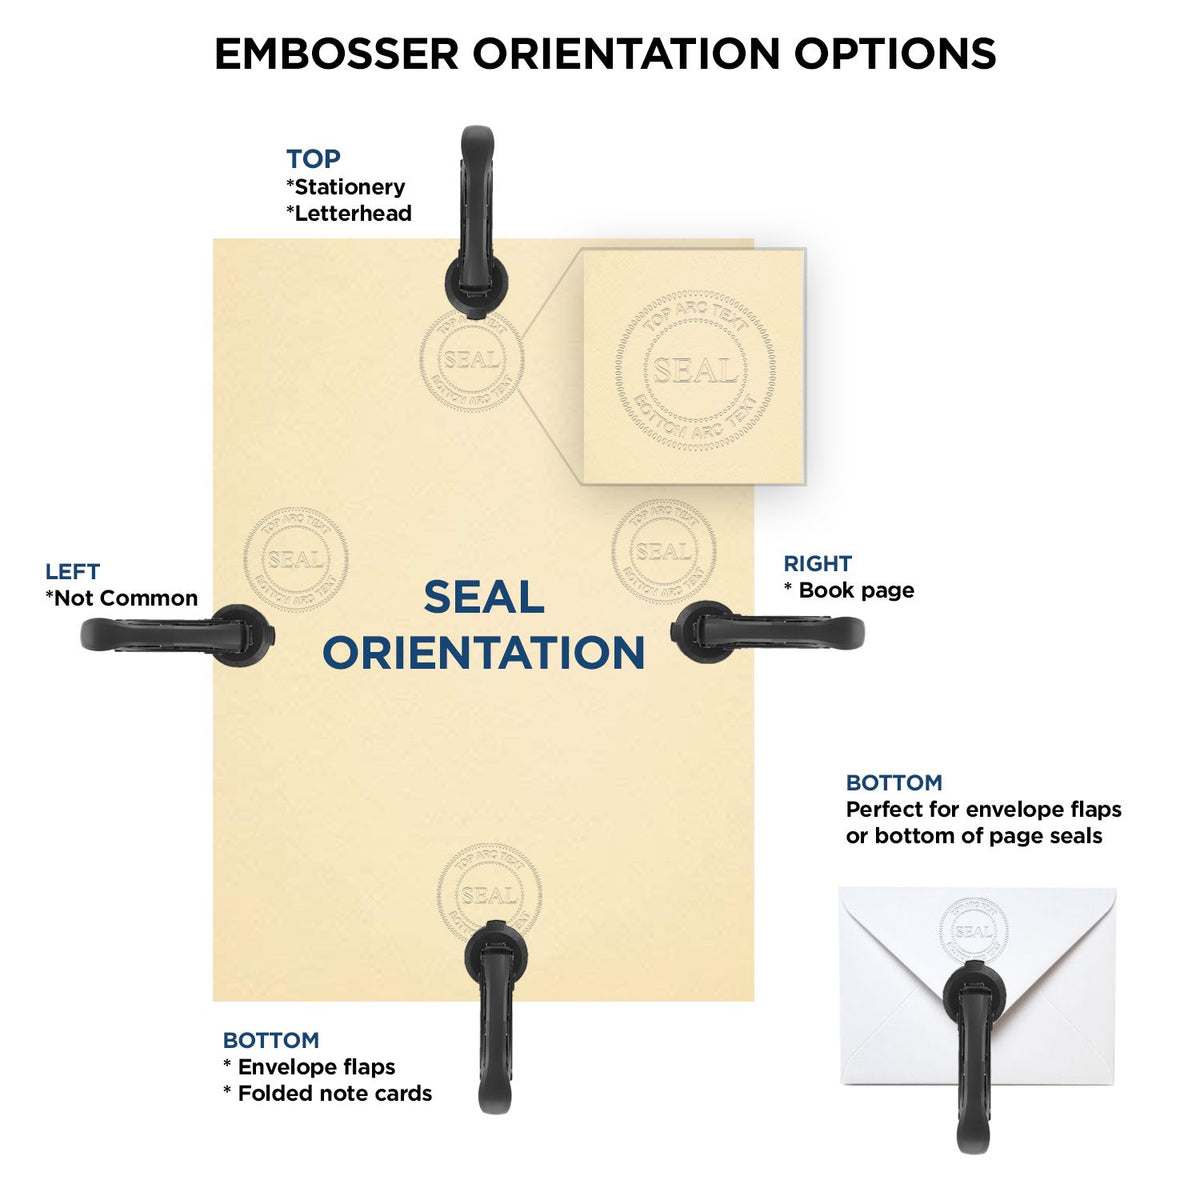 An infographic for the Heavy Duty Cast Iron Alabama Land Surveyor Seal Embosser showing embosser orientation, this is showing examples of a top, bottom, right and left insert.